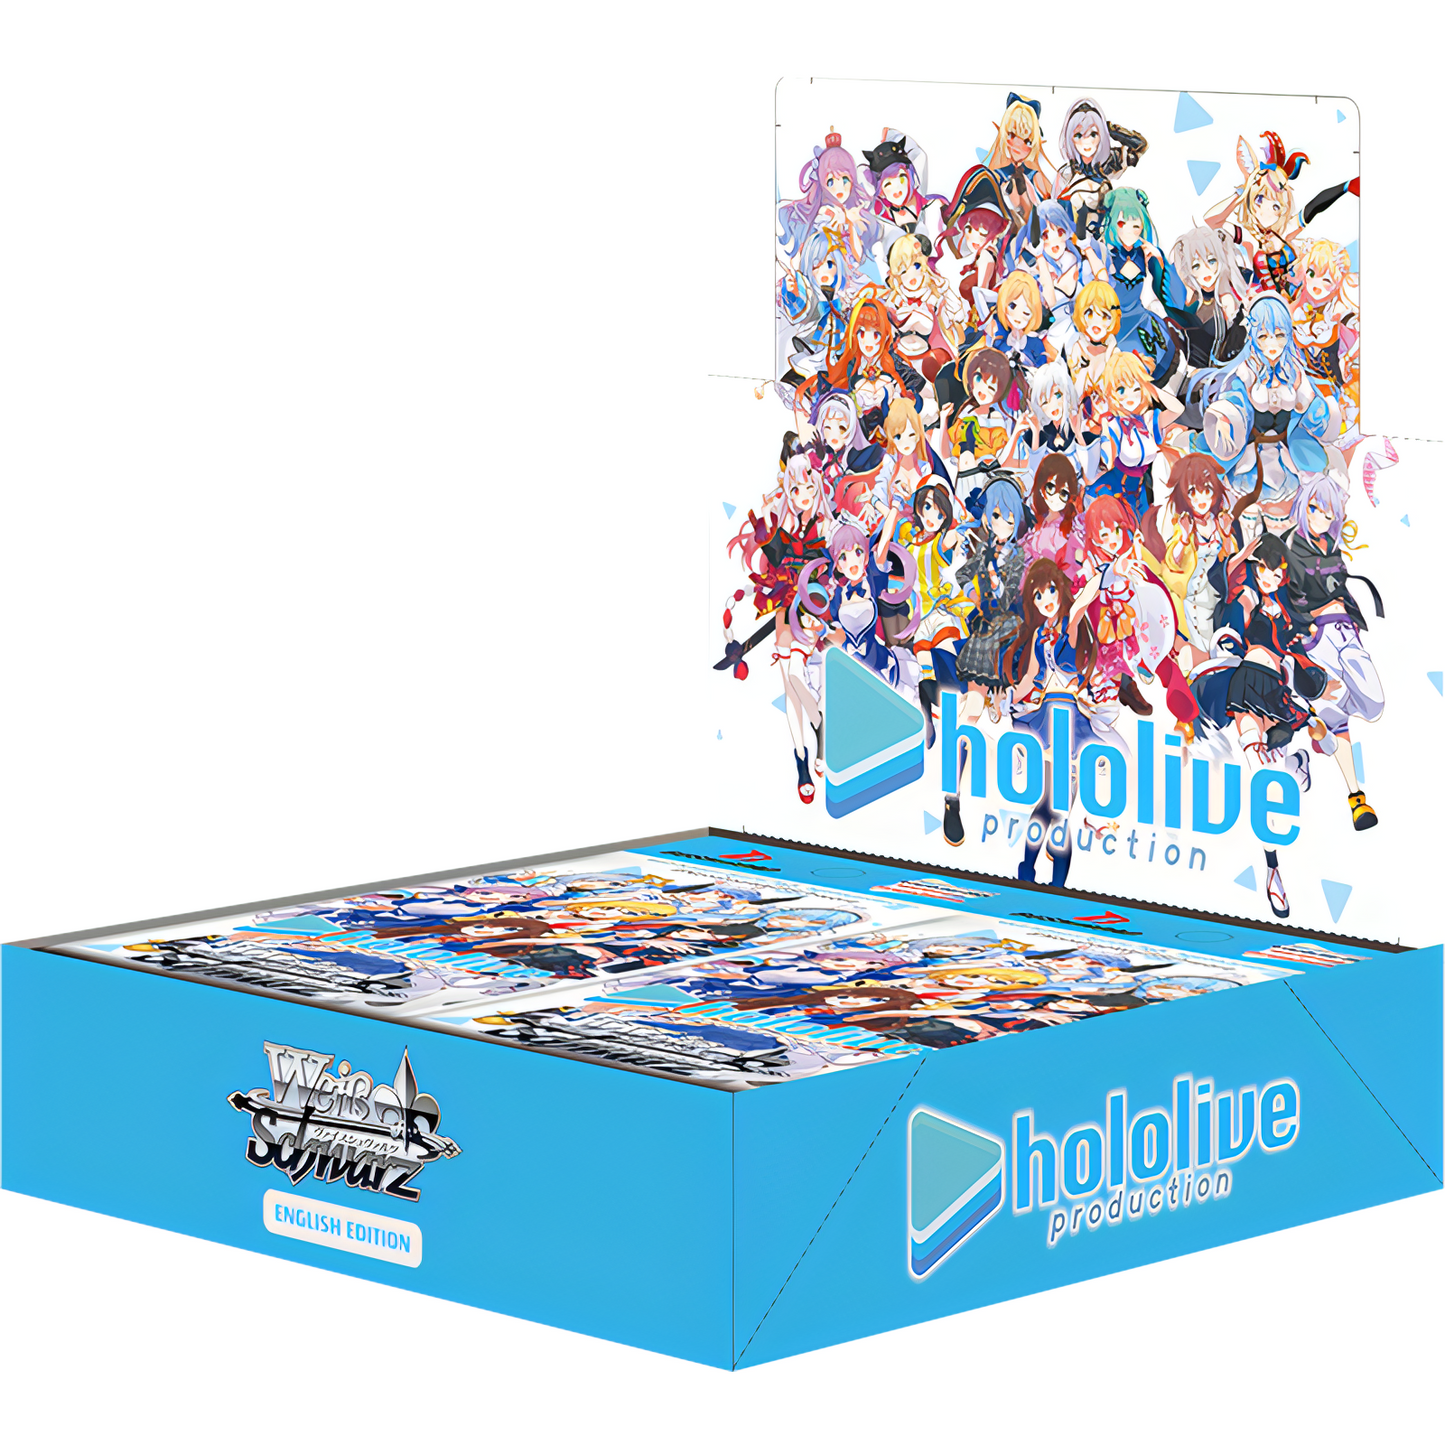 Weiß Schwarz - HoloLive Vol. 1 Production Booster Box (ENG)